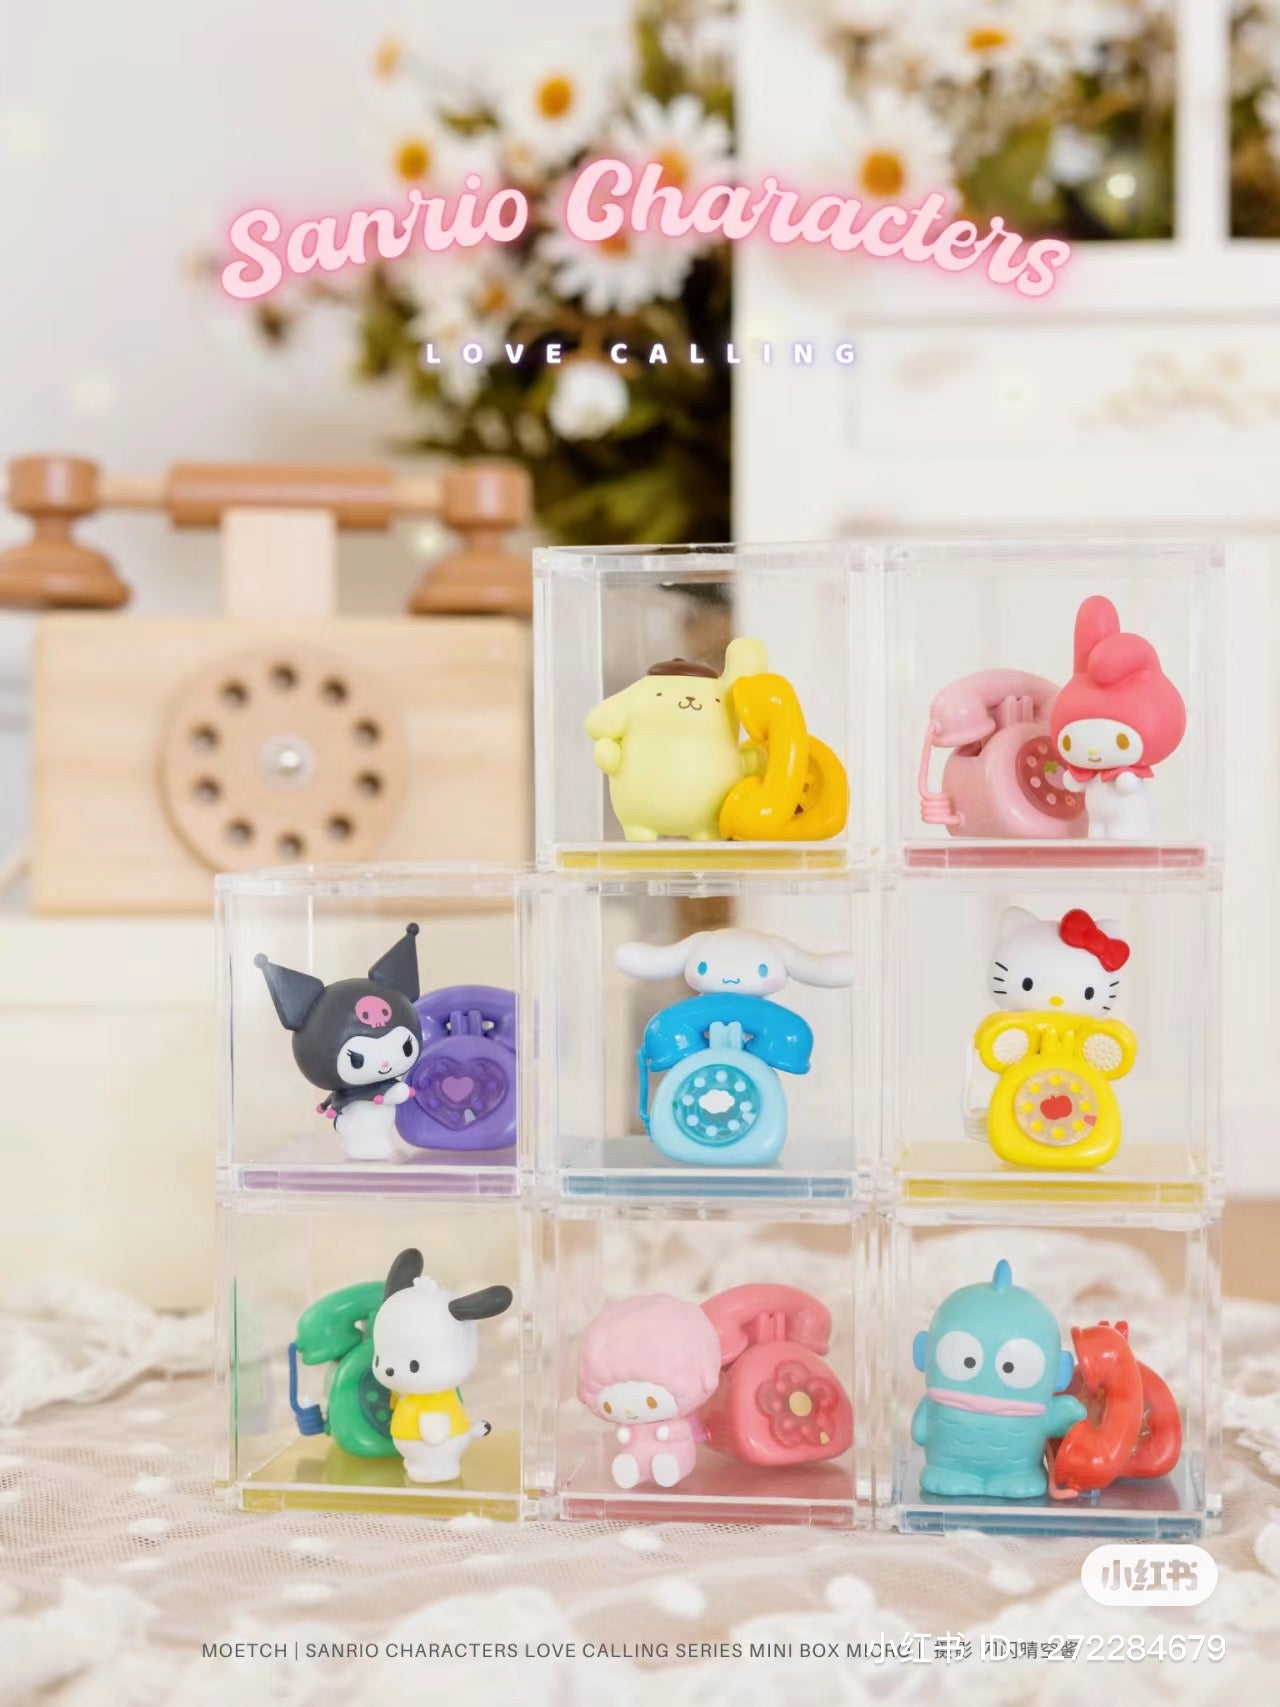 Sanrio characters Love Calling Series Mini Box Micro Blind Box Series toys in a plastic case, featuring various designs and one secret character.